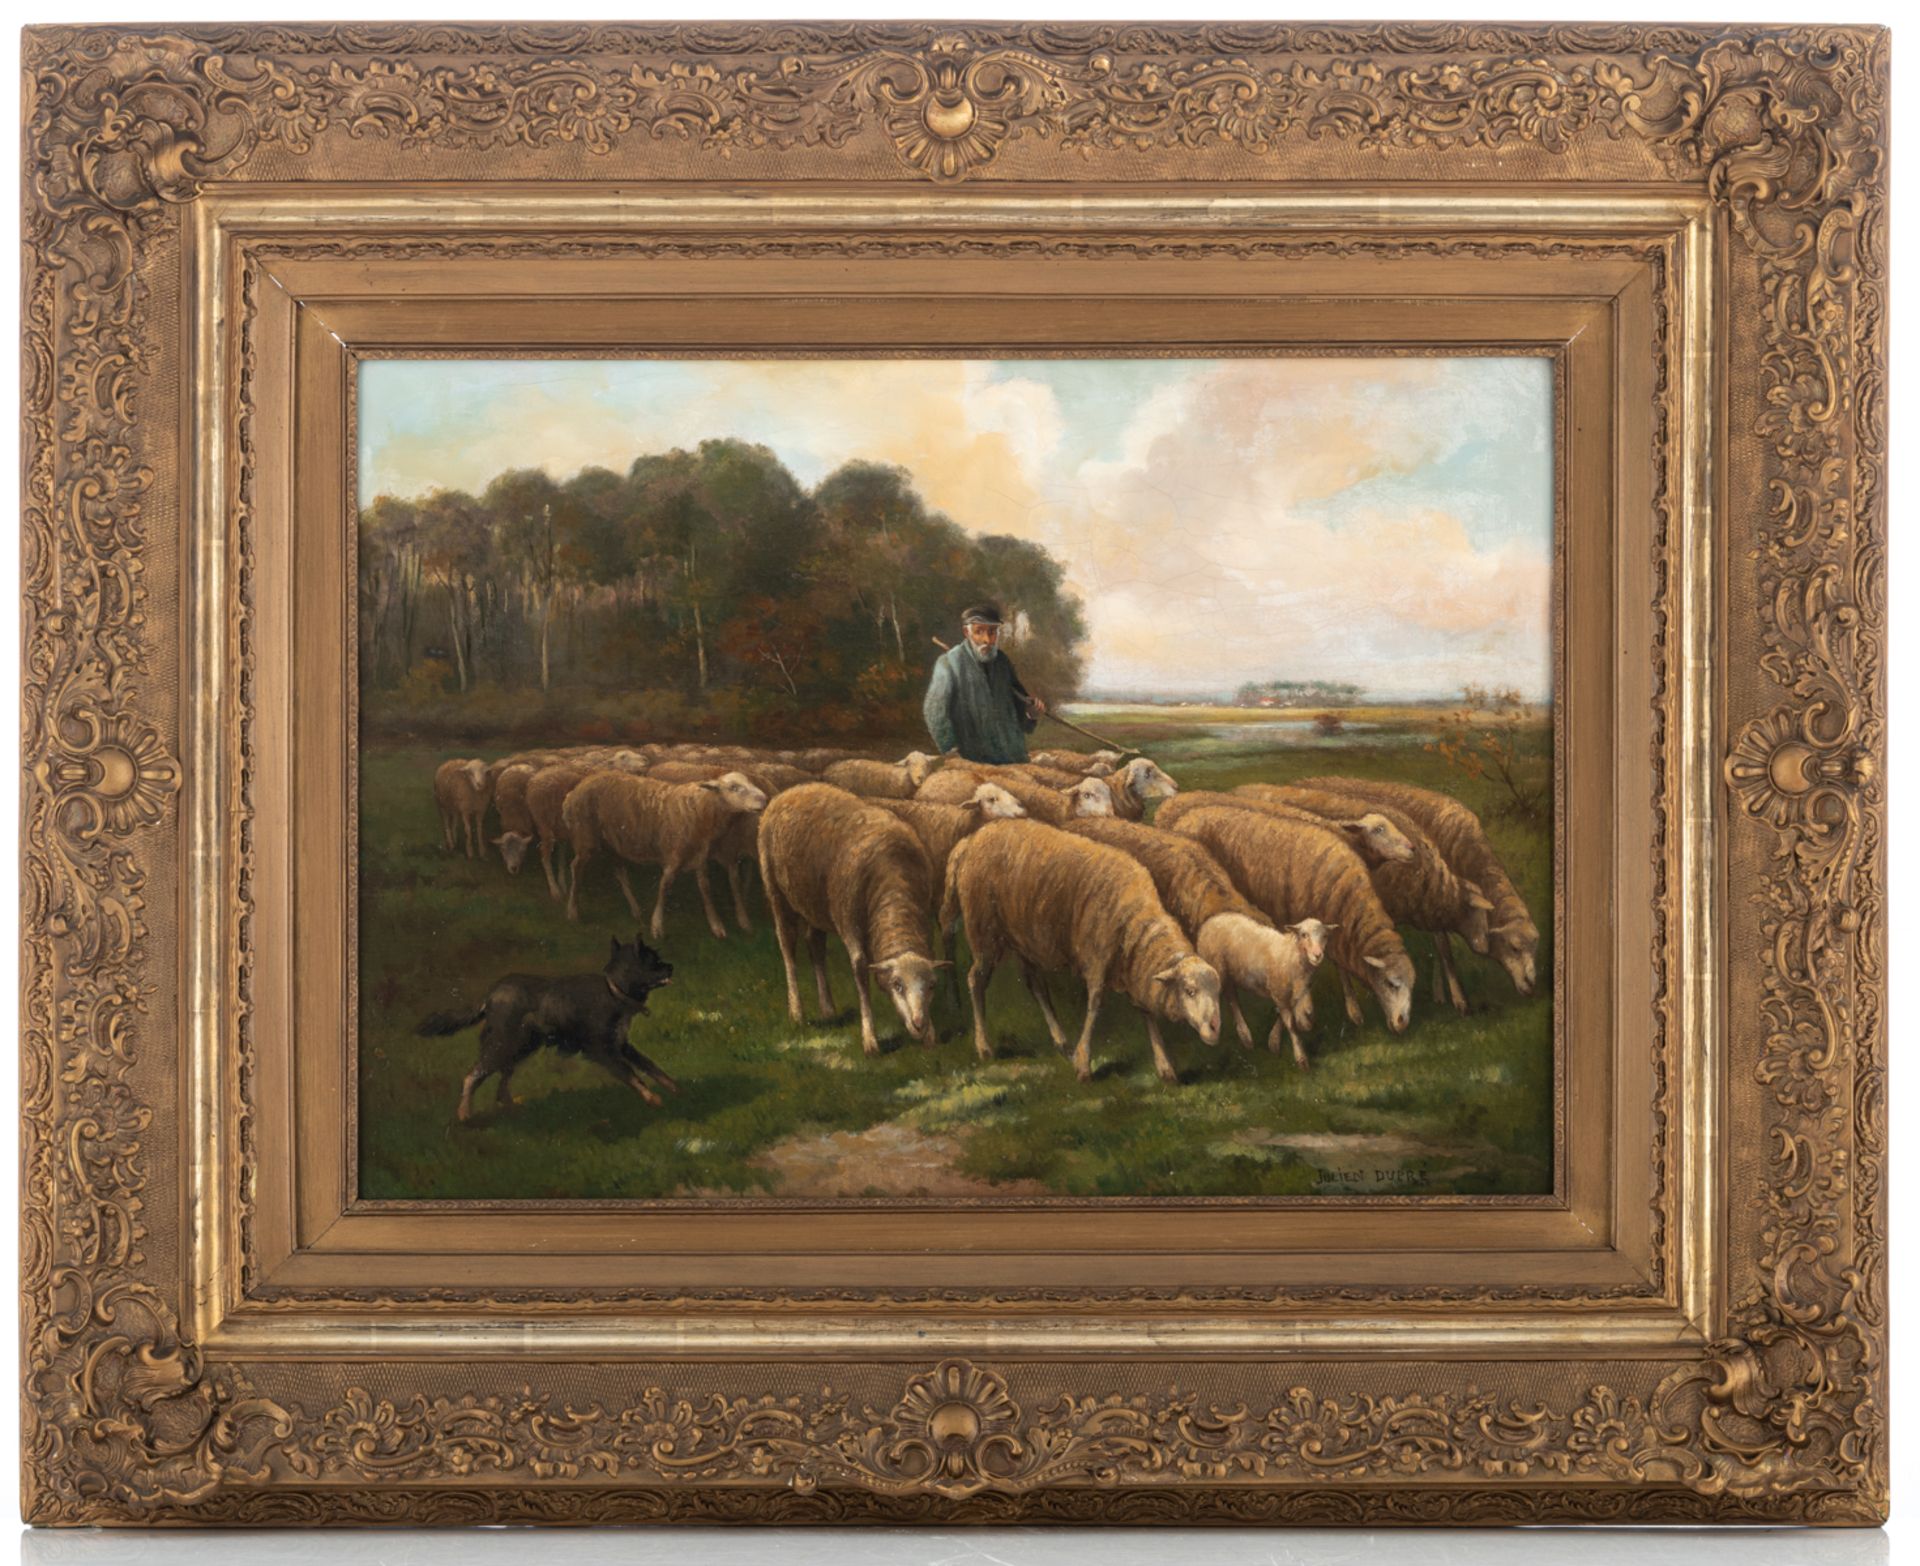 Dupré J., a shepherd and his flock of sheep, oil on canvas, 51,5 x 70 cm - Image 2 of 4